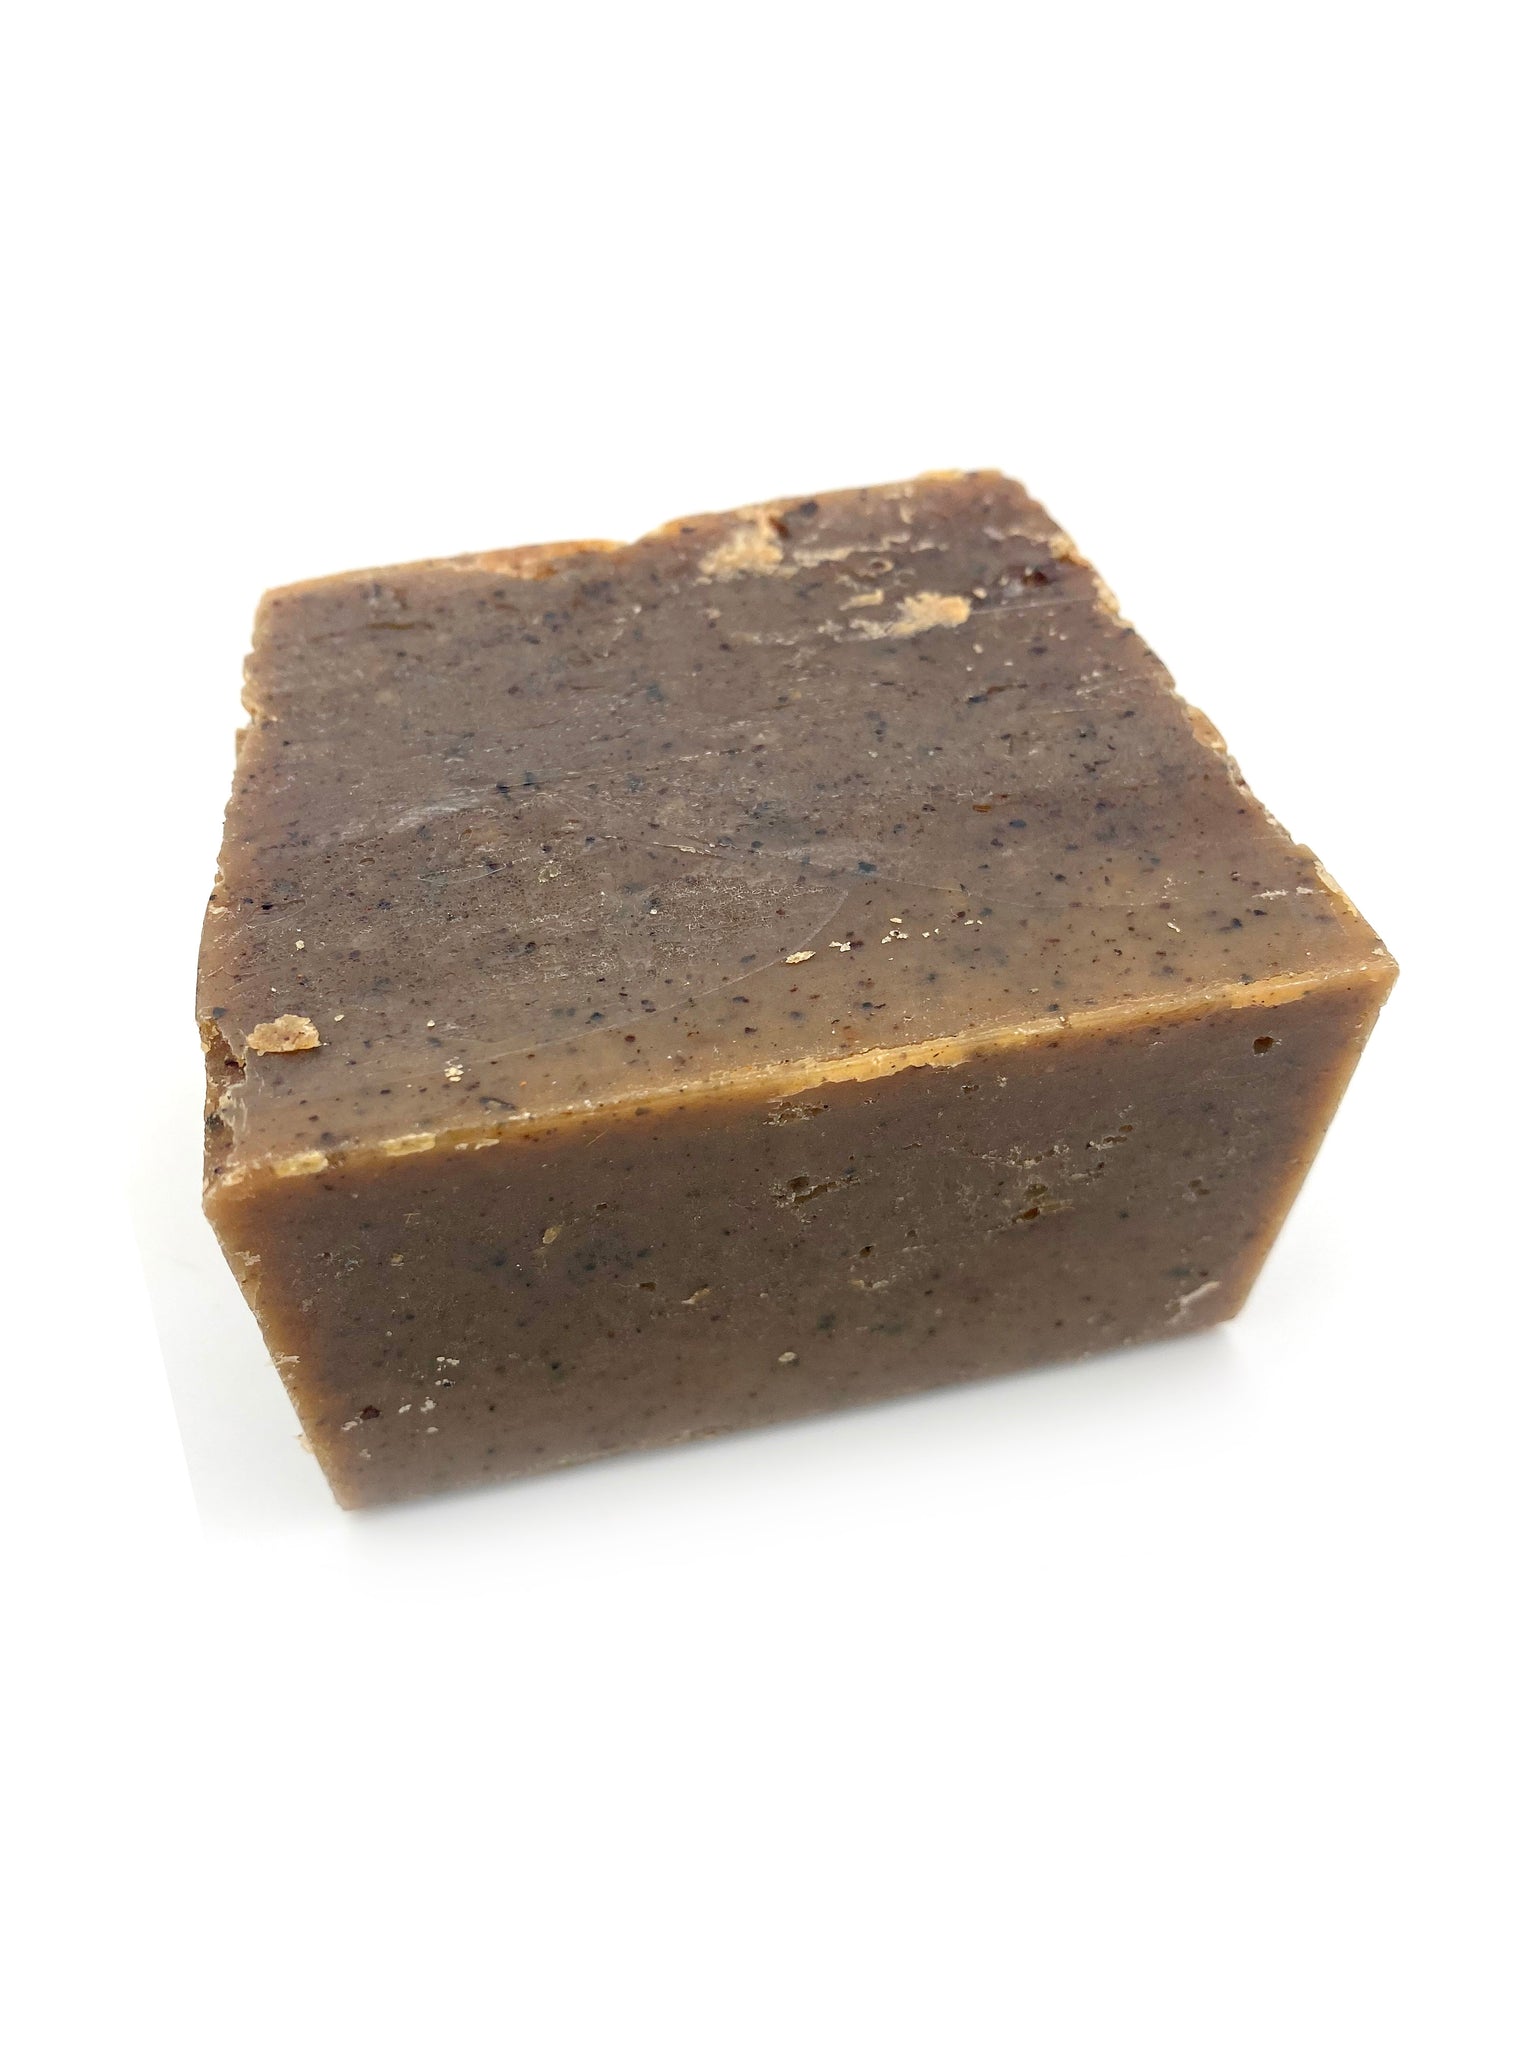 Stout Ale + Tobacco Leaf. Lather Bar, 5oz - The Apothecary Fairy